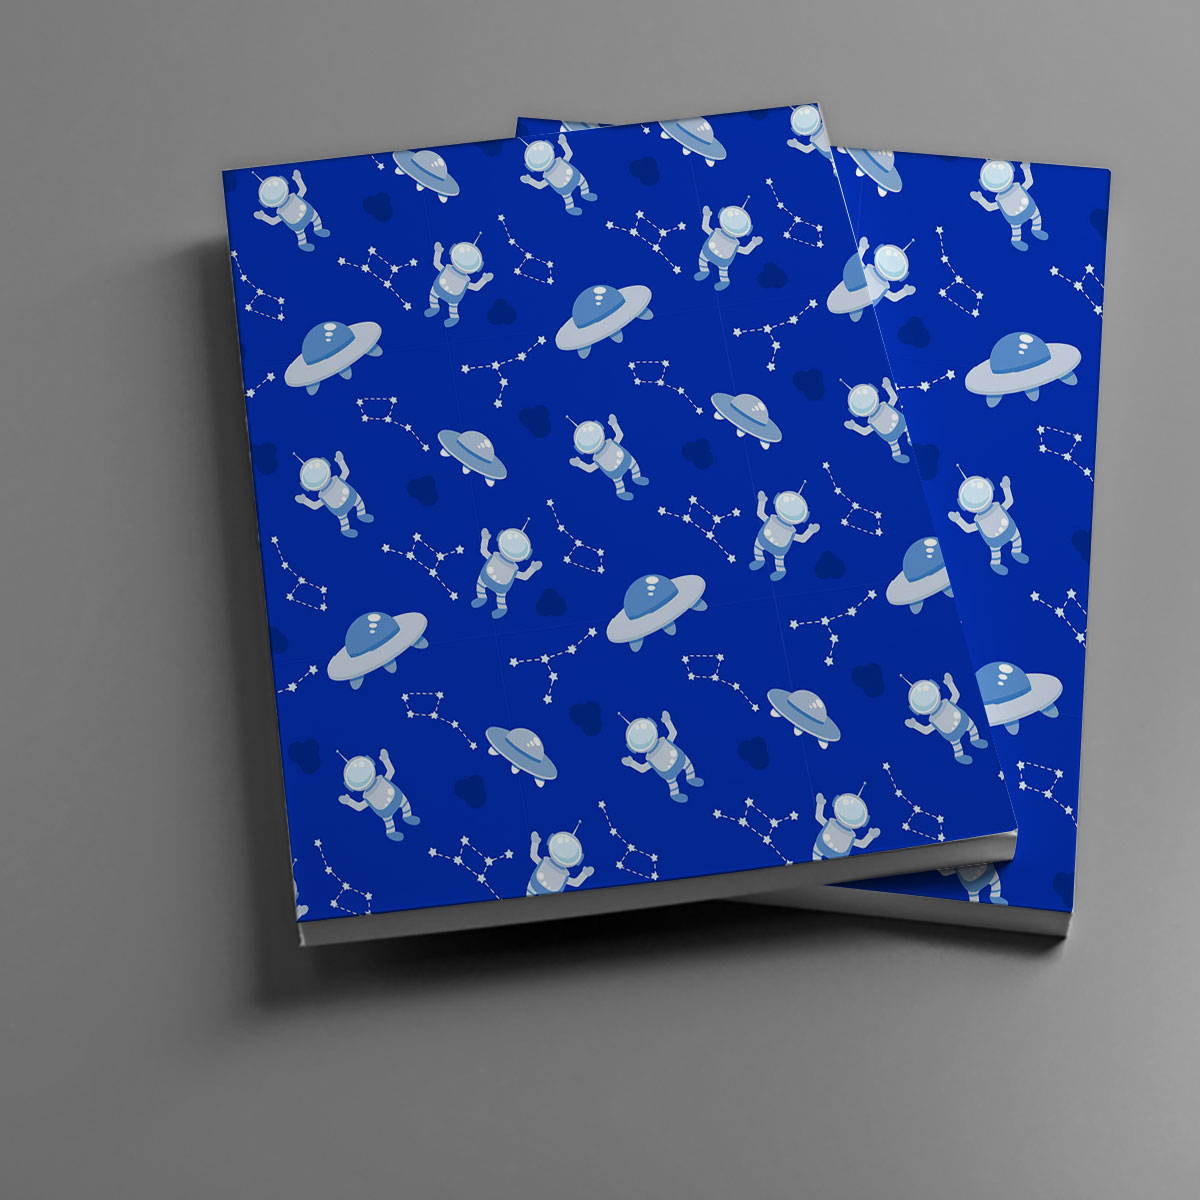 Astronauts Spaceships And Constellation Notebook